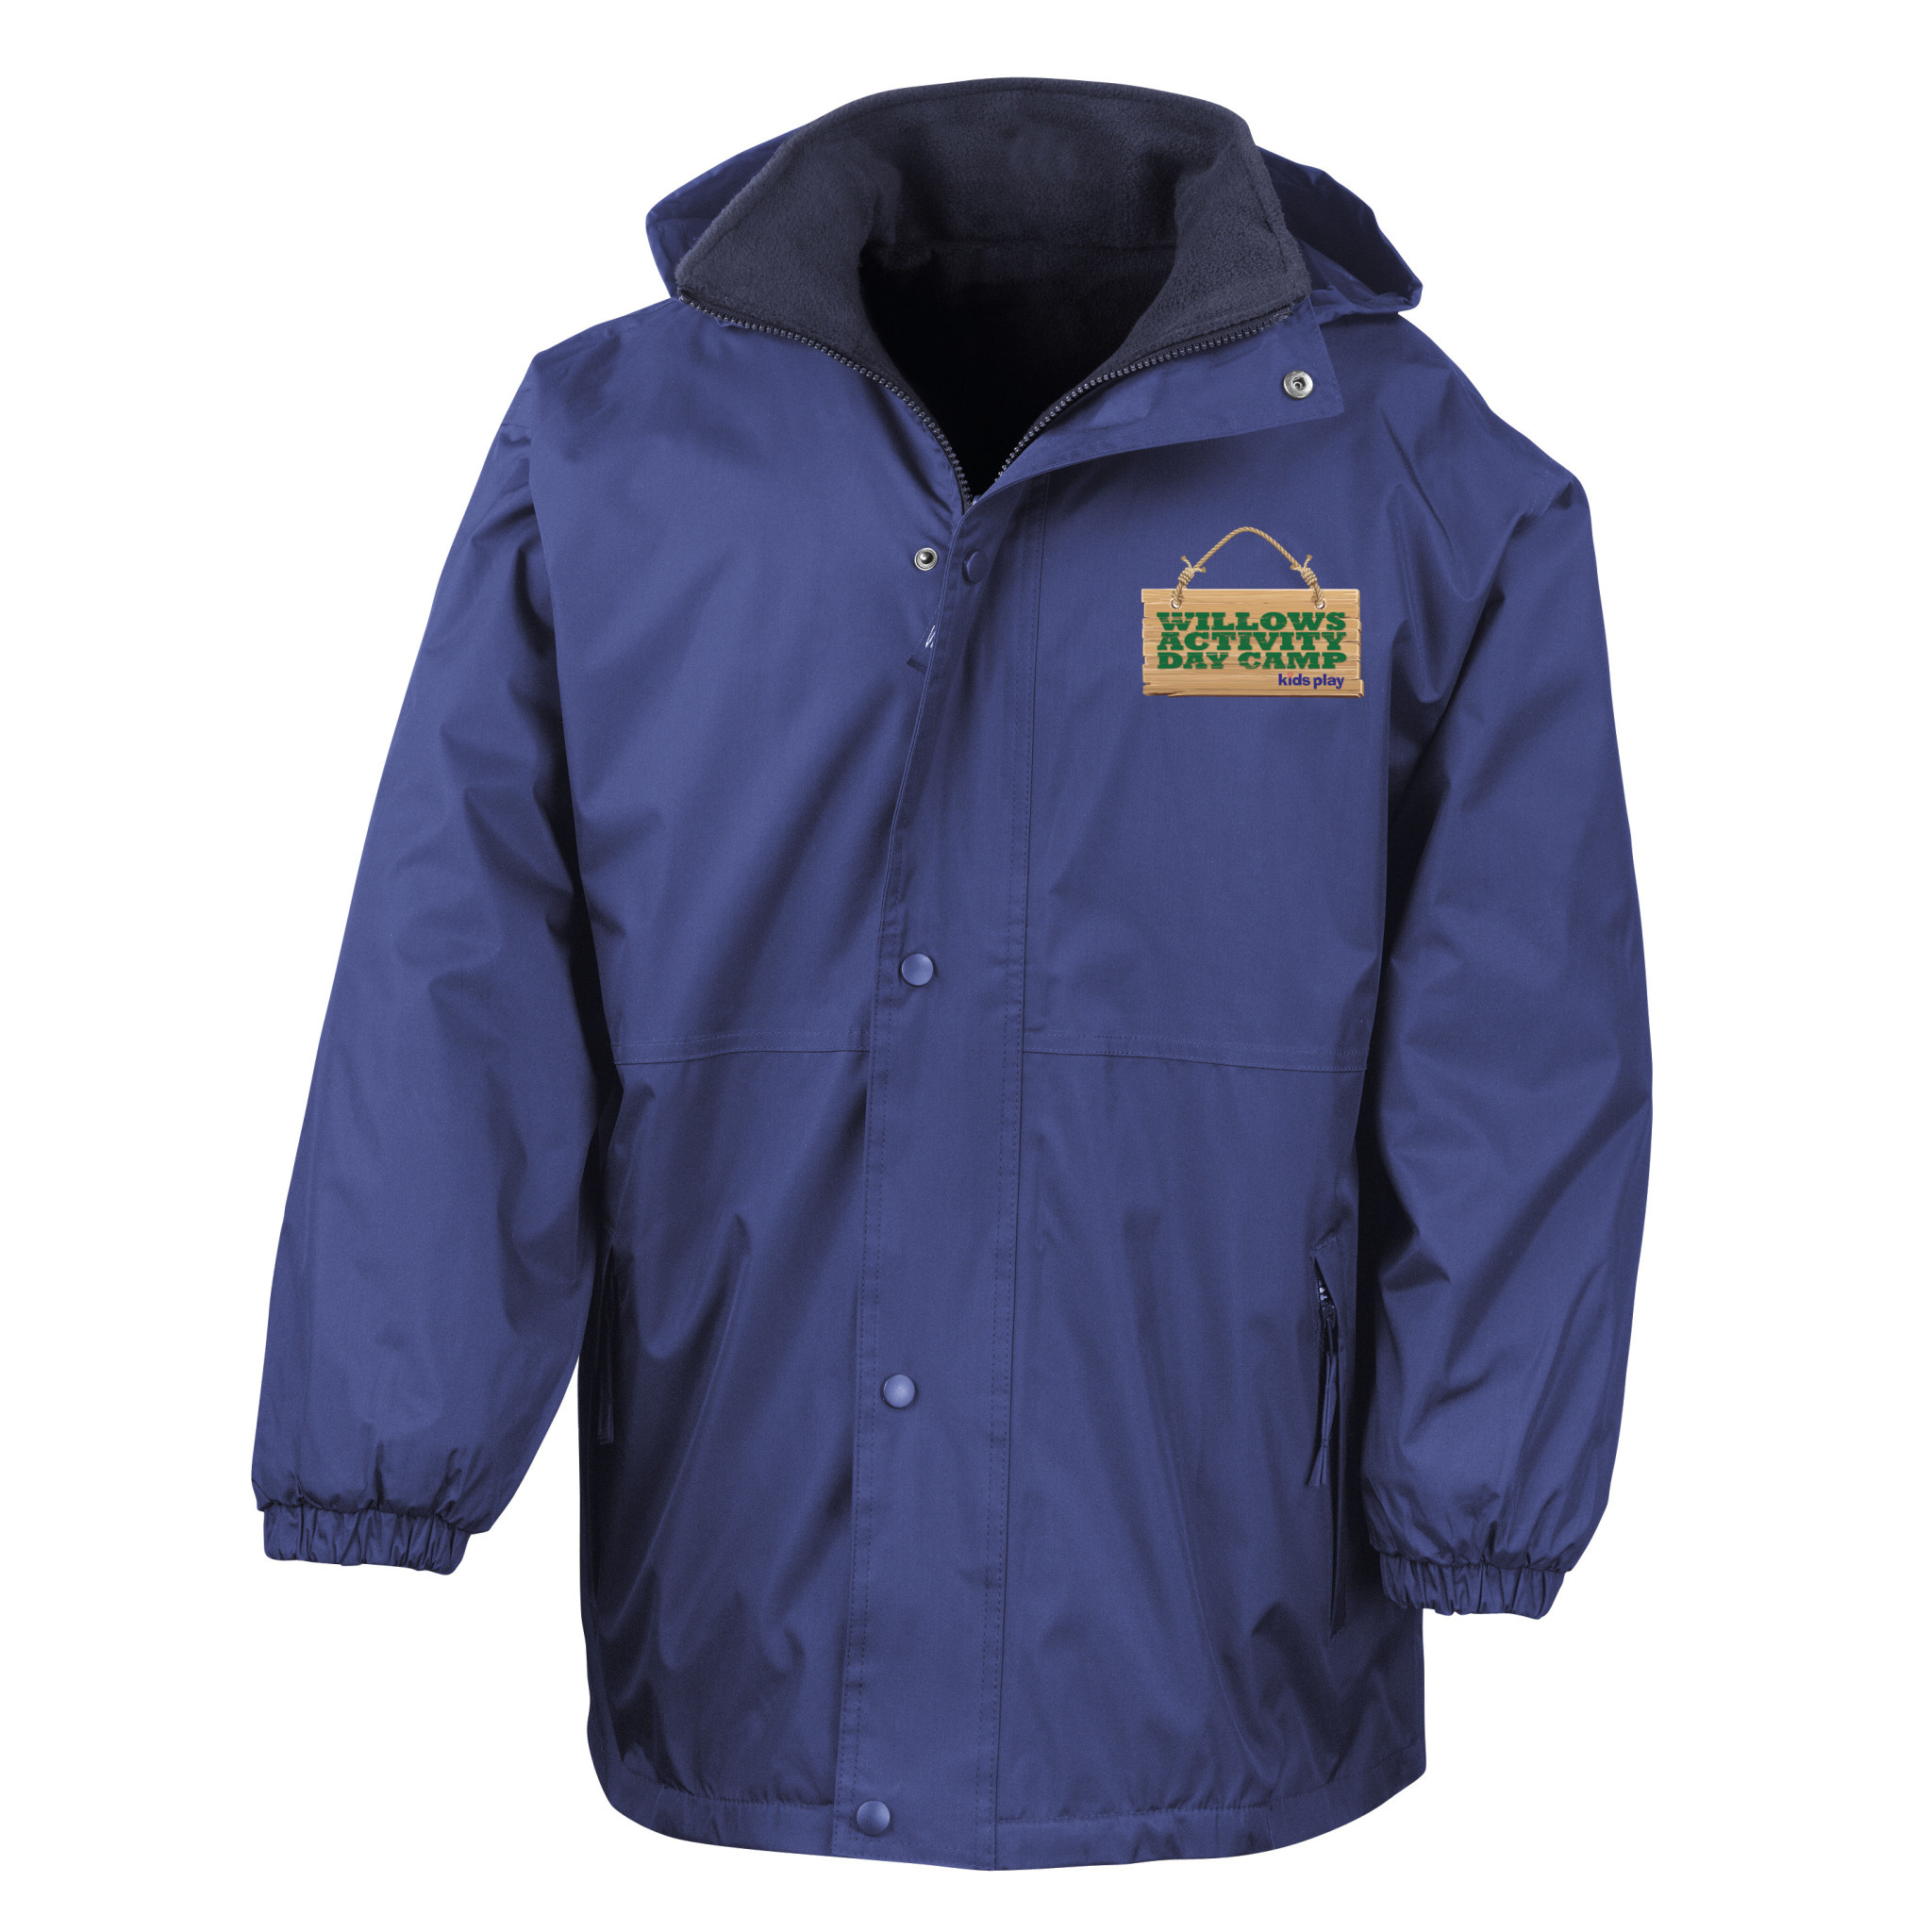 Willows Activity Camp Adults Reversible Jacket